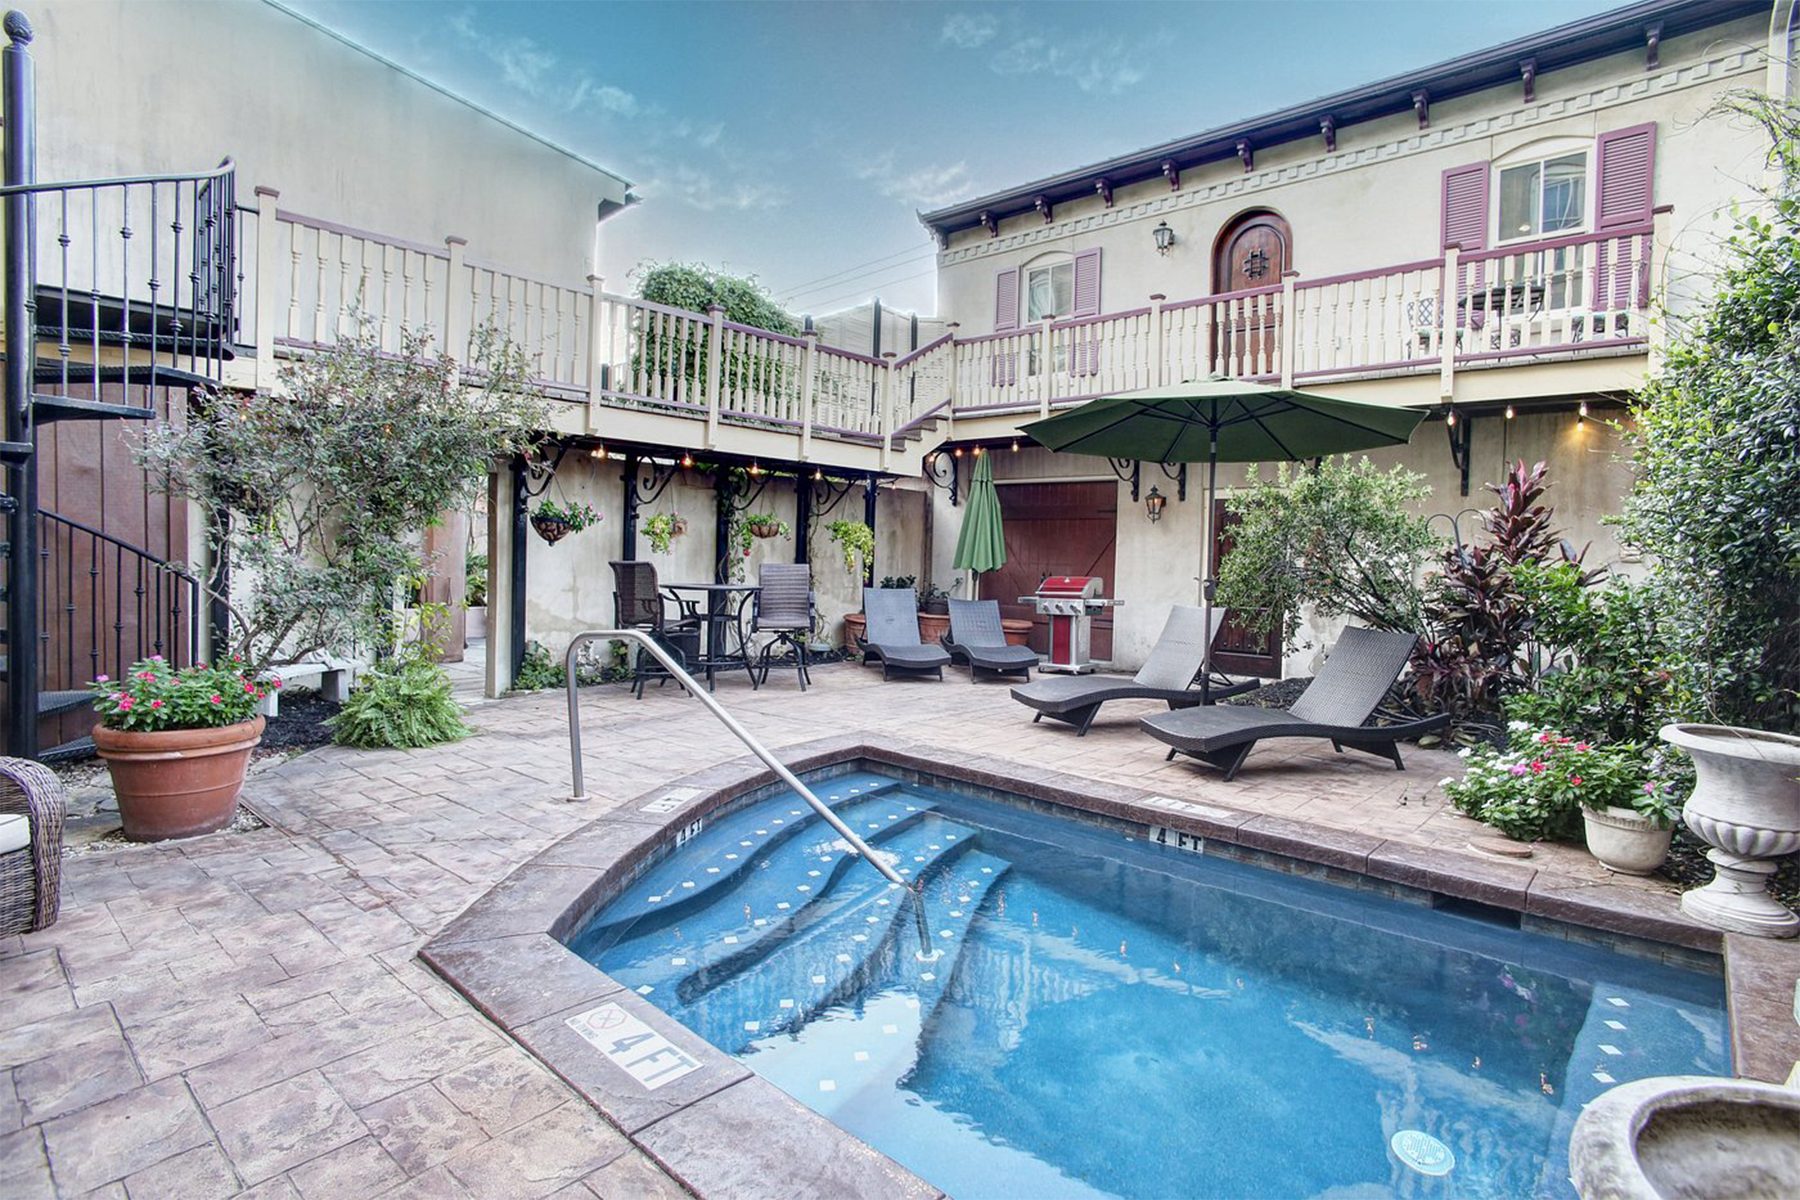 <h3>Savannah, Georgia</h3> <p class=""><strong>Best for: </strong>A couples weekend in an opulent Southern mansion</p> <p>A stay at <a href="https://www.tripadvisor.com/Hotel_Review-g60814-d266911-Reviews-McMillan_Inn-Savannah_Georgia.html" rel="noopener">McMillan Inn</a> is like visiting another era with its extravagant decor and antiques. This beautiful 1888 Italianate Revival inn, located in Savannah's Historic District, consistently receives excellent reviews for its accommodations, location and gracious hosts, Melissa and Eric Calhoun and their son and daughter-in-law, Joshua and Emmie. Guests of the property also enjoy the full signature Southern breakfast served each morning on fine china with sweet and savory dishes like peach pie pancakes, banana bread French toast, quiche Lorraine and hash brown casserole.</p> <p>There are six garden-level rooms; five are accessible without stairs. Each room features either a queen- or king-size bed, and five rooms have fireplaces. Seven upper-level rooms are located on the first and second floors, and one room, The Montgomery, has a private elevator. For longer stays and more room to spread out, McMillan Inn offers a carriage house with a parlor and a full kitchen. In the afternoon, you'll find peach ice tea and sweet treats like freshly baked brownies or rich butter cake to keep you satisfied until dinner.</p> <p><strong>Pros:</strong></p> <ul> <li class="">Just two blocks from Forsyth Park</li> <li class="">Beautiful public spaces (two parlors)</li> <li class="">A pool and an outdoor living area</li> </ul> <p><strong>Cons:</strong></p> <ul> <li class="">Children under 15 years of age are not permitted</li> <li class="">Only service dogs (with agreement from the owner) are allowed at the inn</li> </ul> <p class="listicle-page__cta-button-shop"><a class="shop-btn" href="https://www.tripadvisor.com/Hotel_Review-g60814-d266911-Reviews-McMillan_Inn-Savannah_Georgia.html">Book Now</a></p>